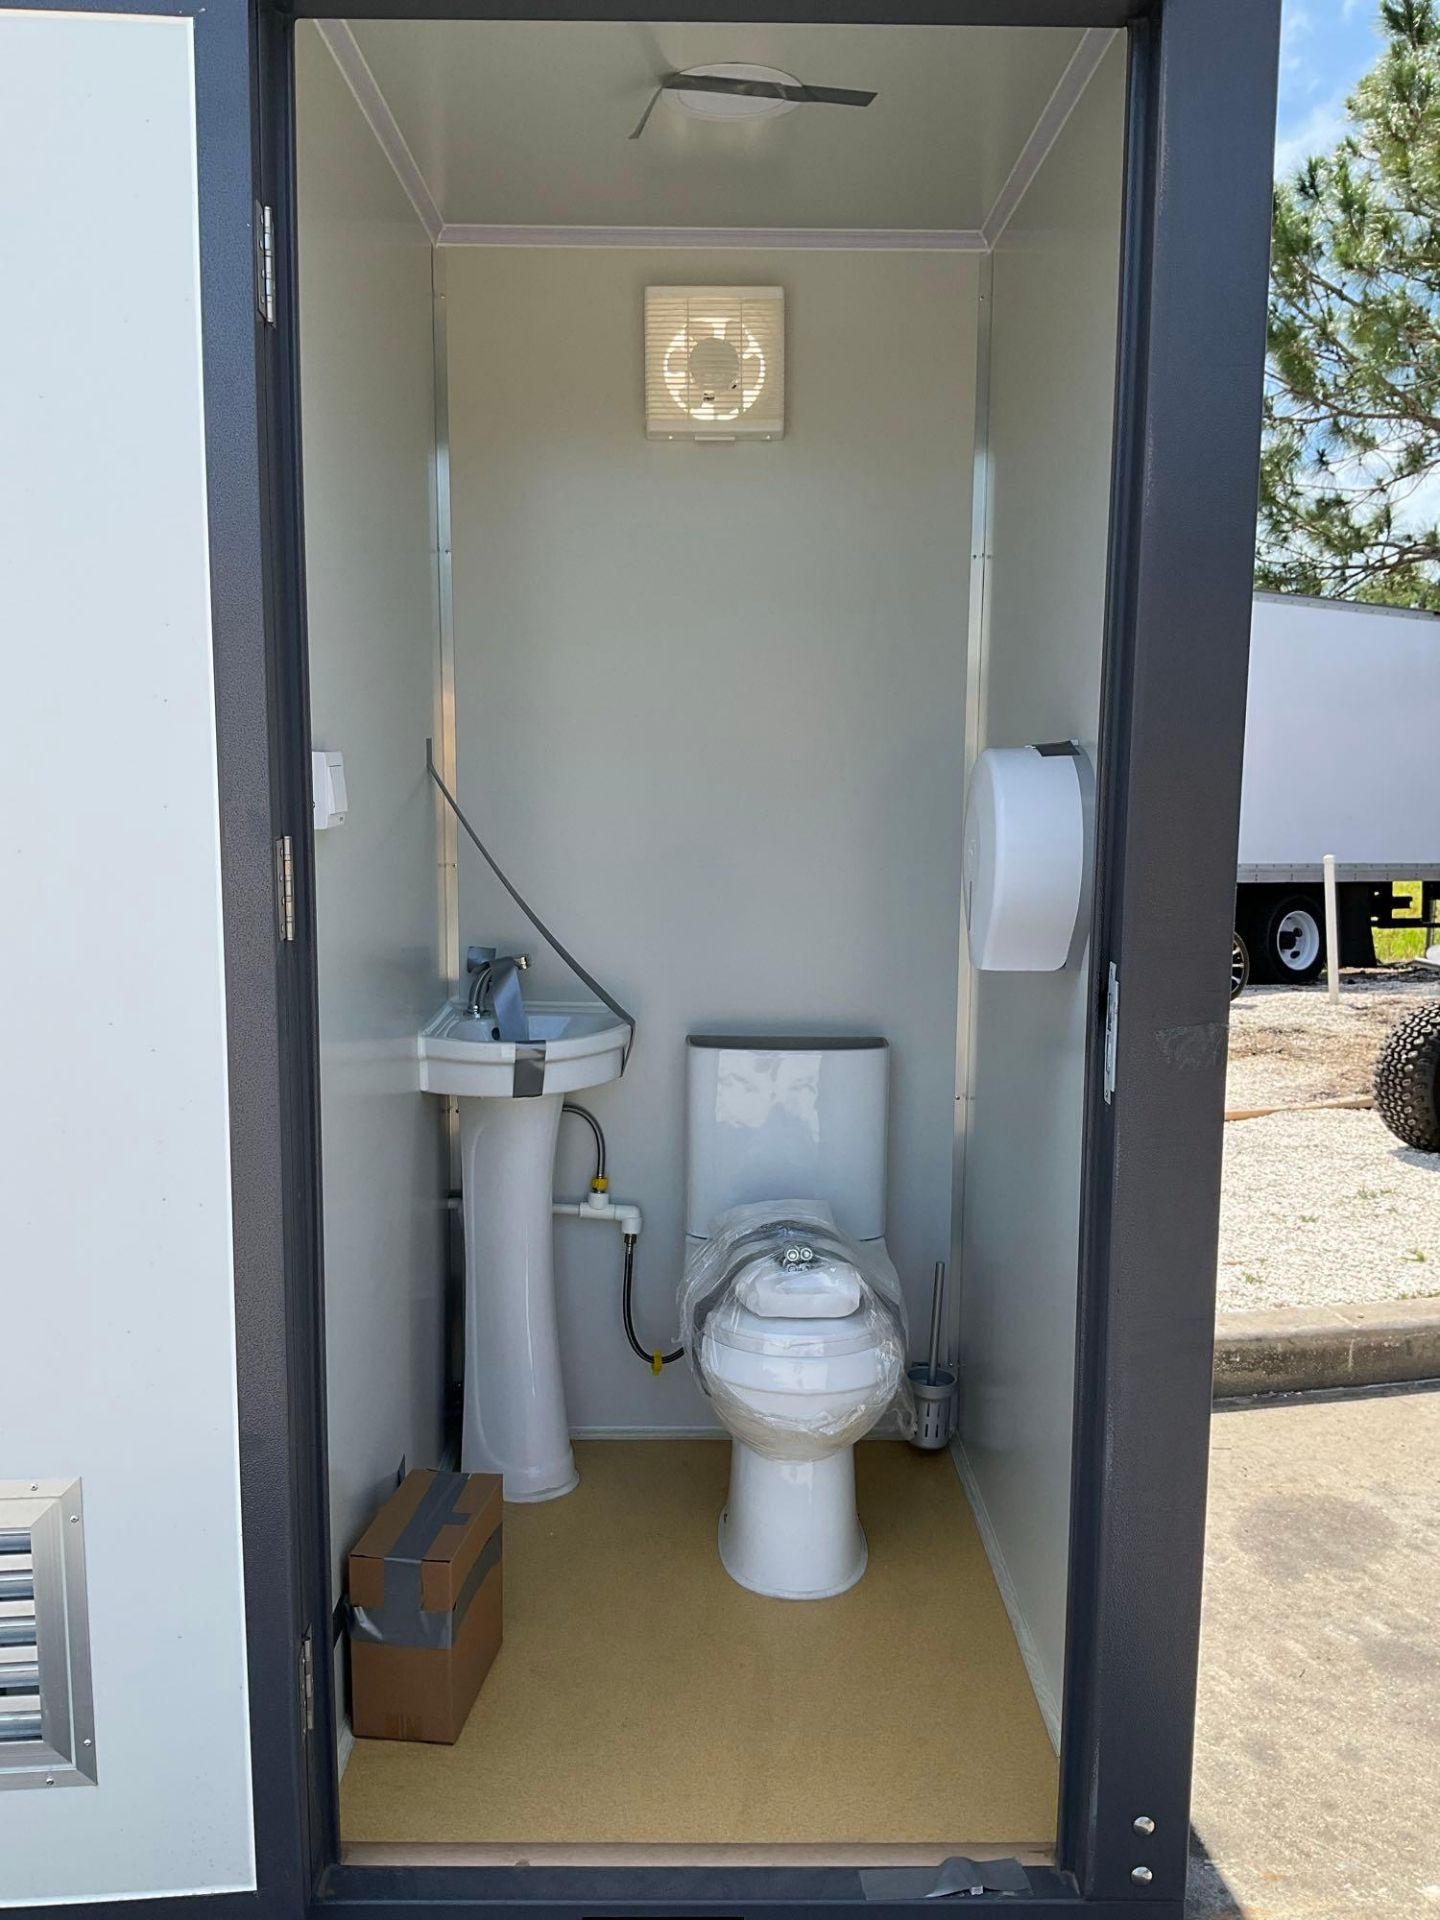 UNUSED PORTABLE DOUBLE BATHROOM UNIT, 2 STALLS, ELECTRIC & PLUMBING HOOK UP WITH EXTERIOR PLUMBIN... - Image 11 of 11